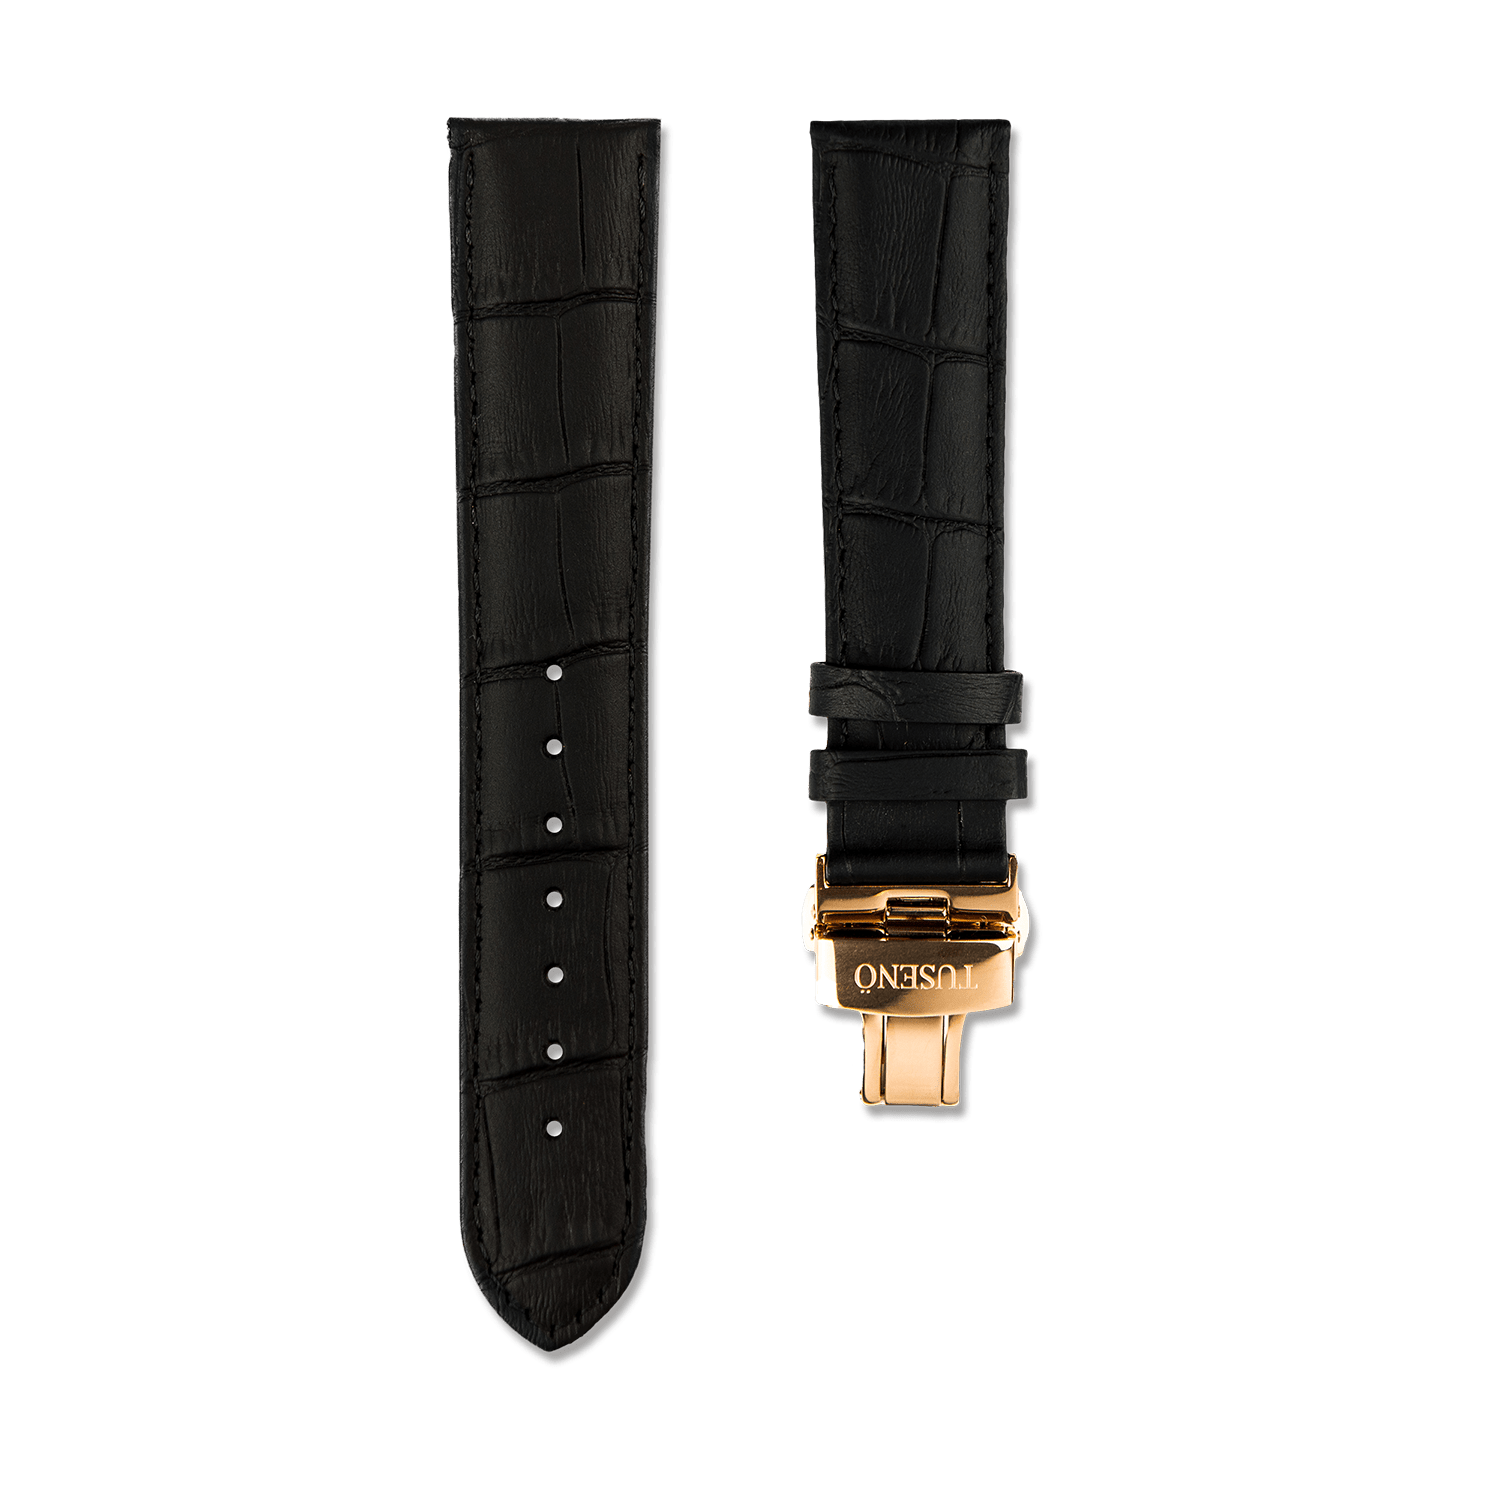 Black leather strap | Tusenö, Swedish watches online since 2015